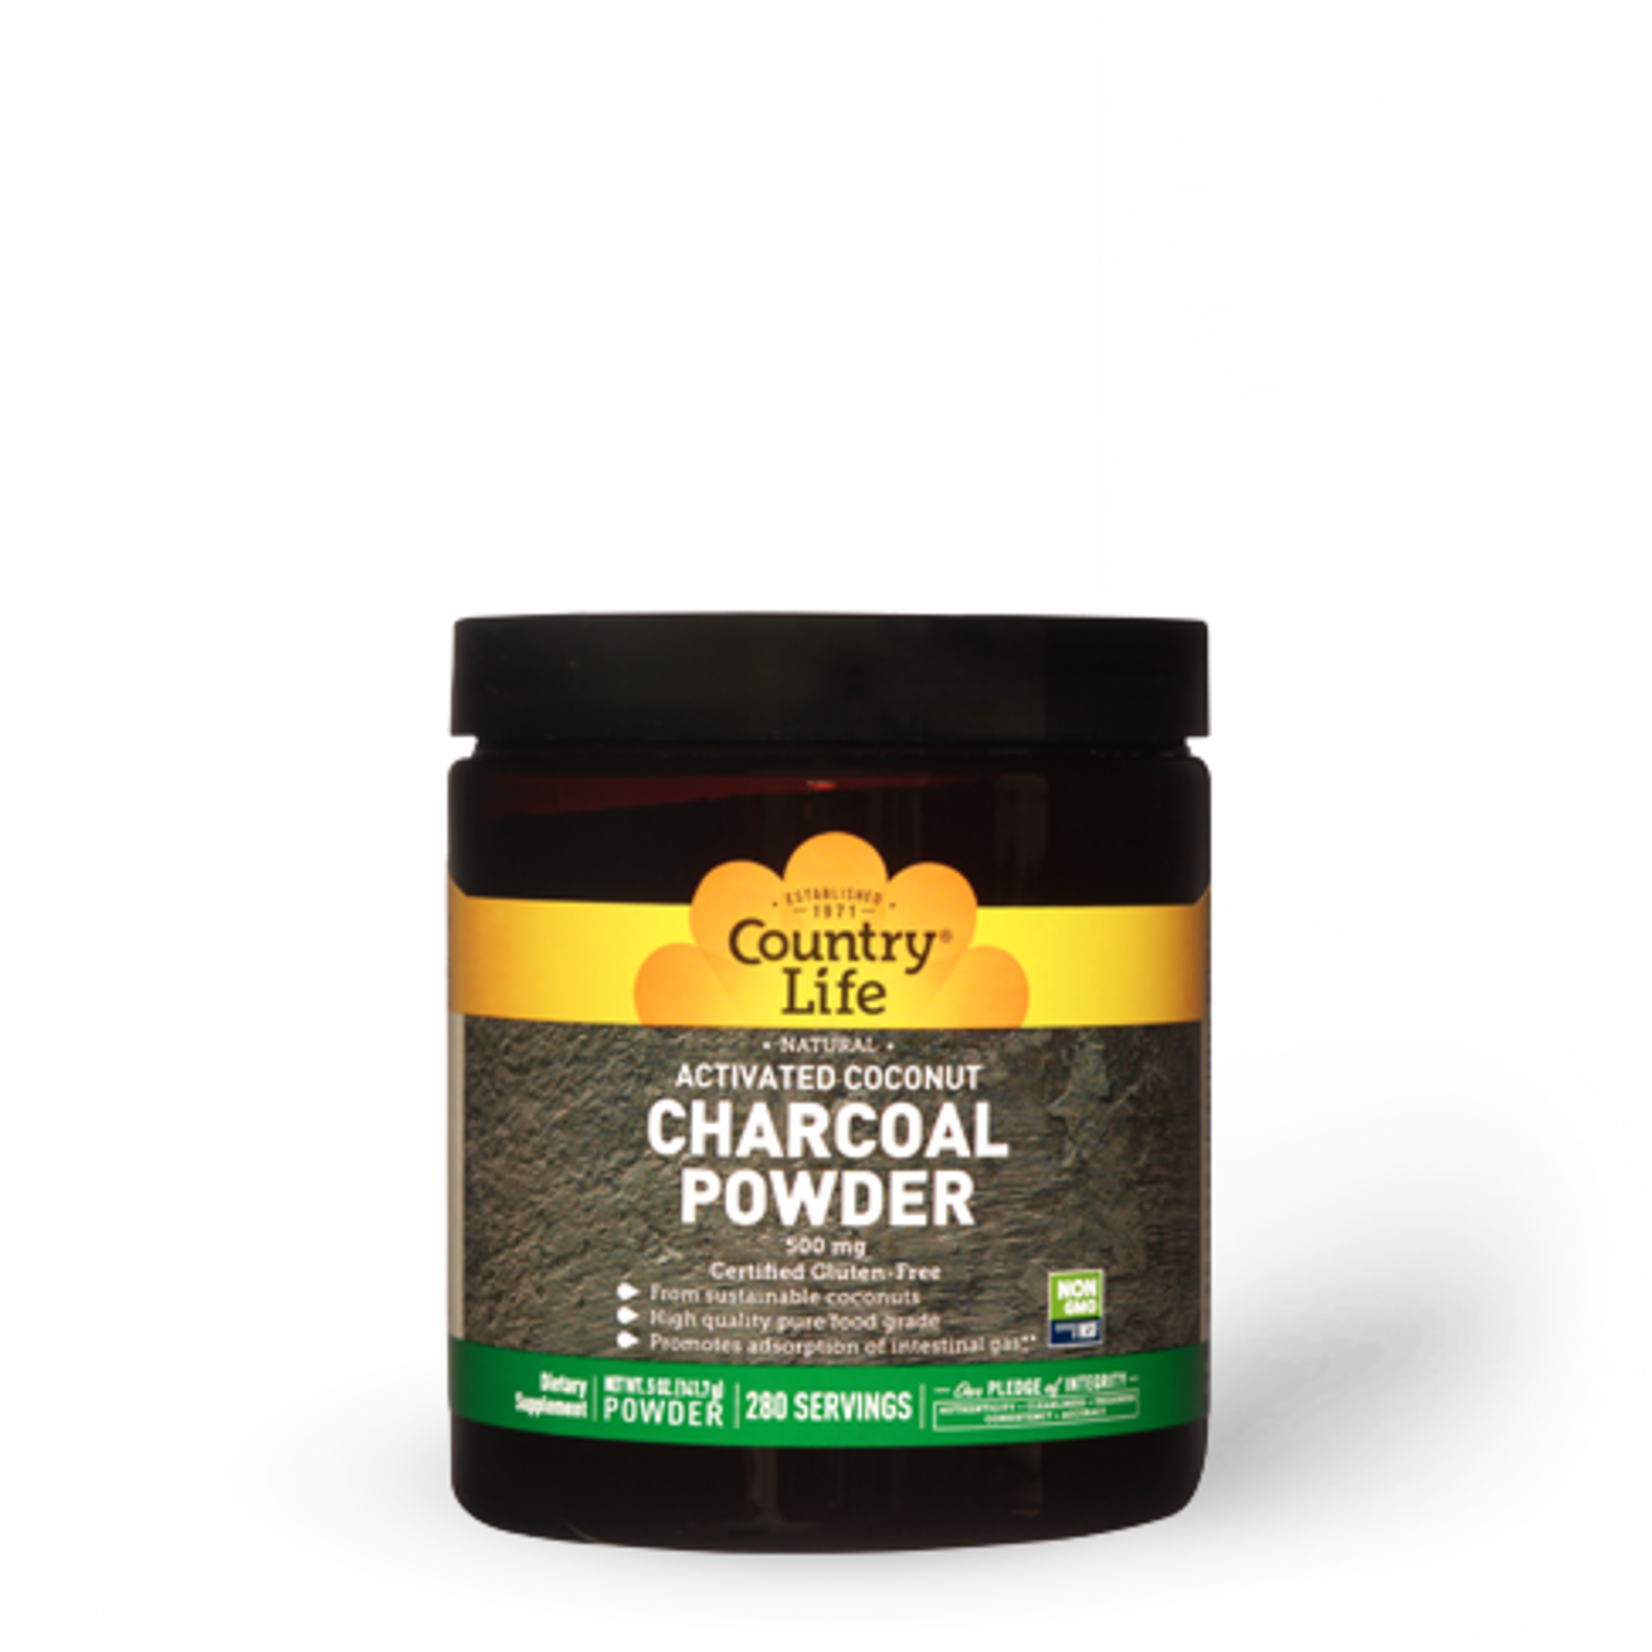 Country Life Country Life - Natural Activated Coconut Charcoal Powder - 0.5 oz